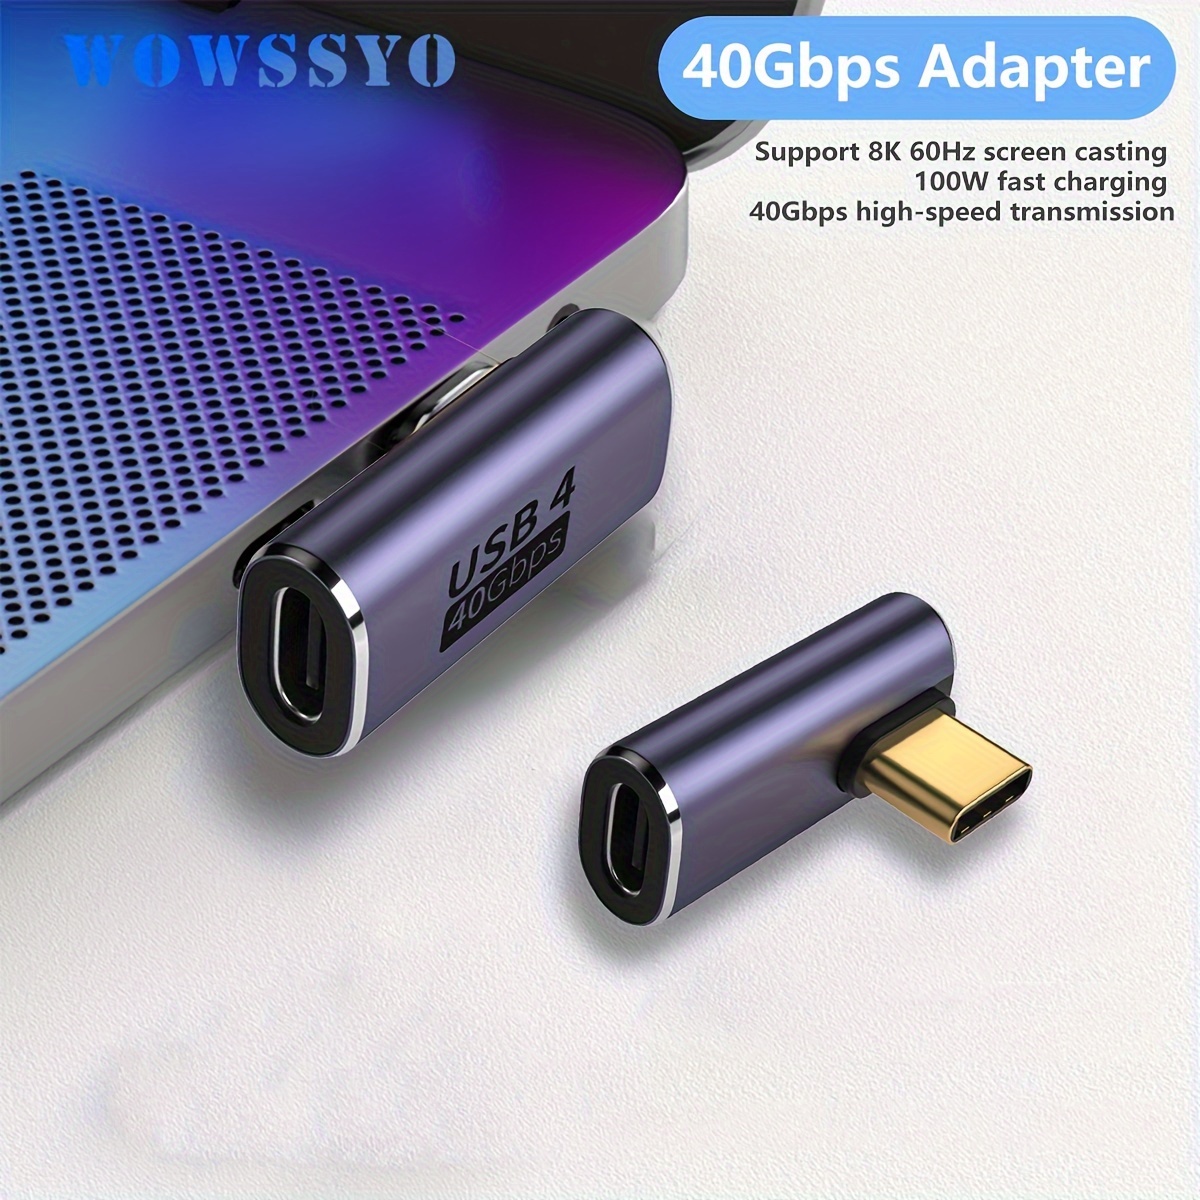 

90° Right Angle Usb C Adapter, Support Thunderbolt 3 Type-c Adapter 40gbps Data Transfer, 100w Fast Charging, 8k@60hz Video Output For Laptops, Tablets & Phones